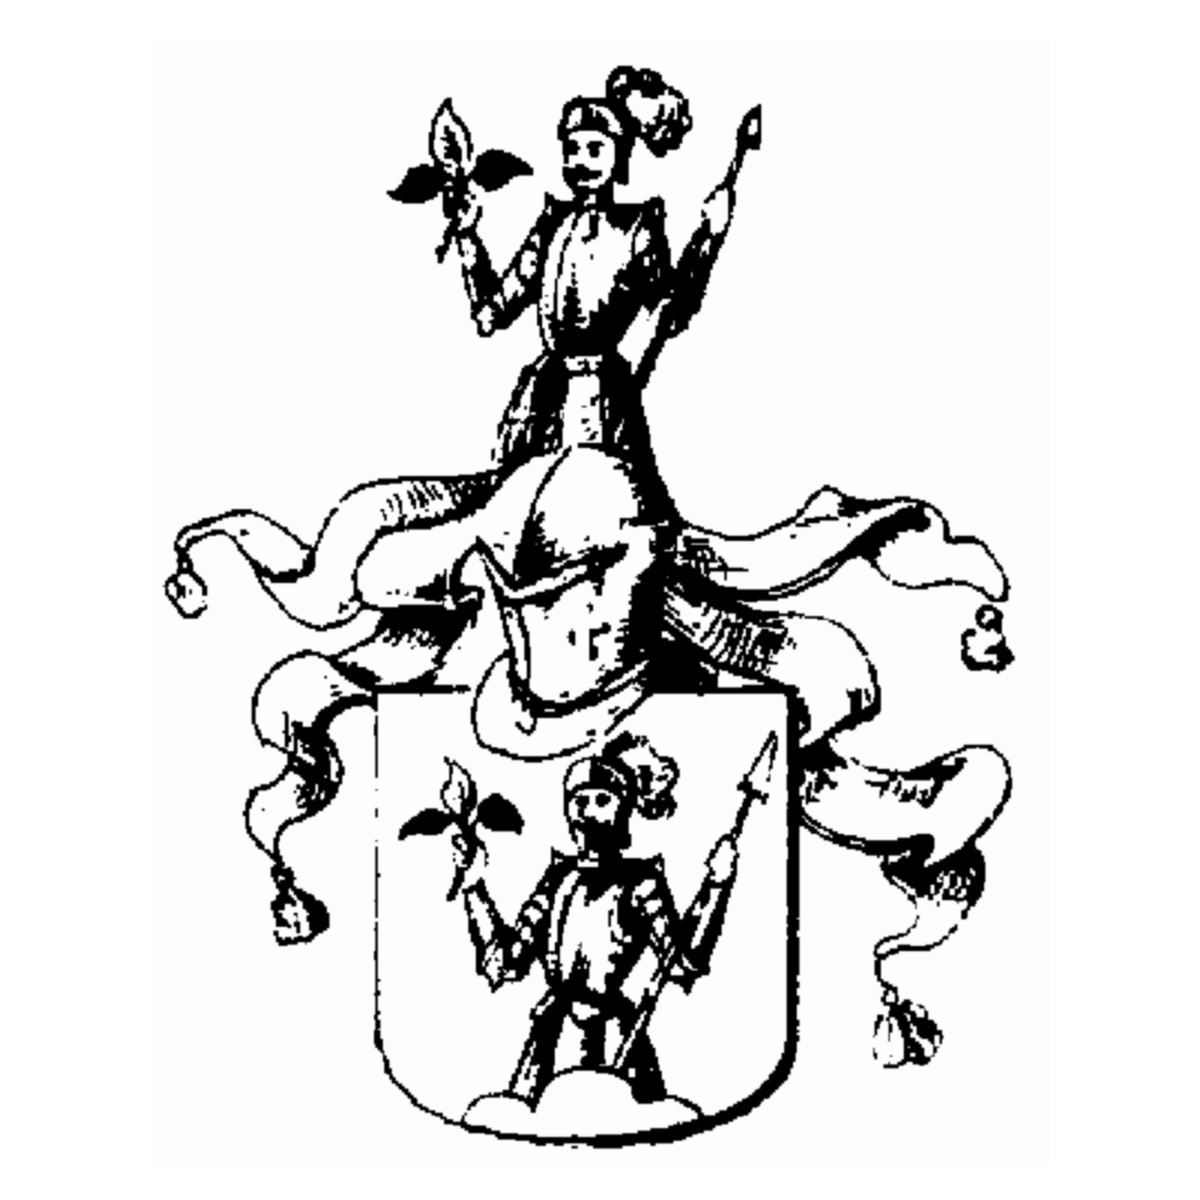 Coat of arms of family Pfluger